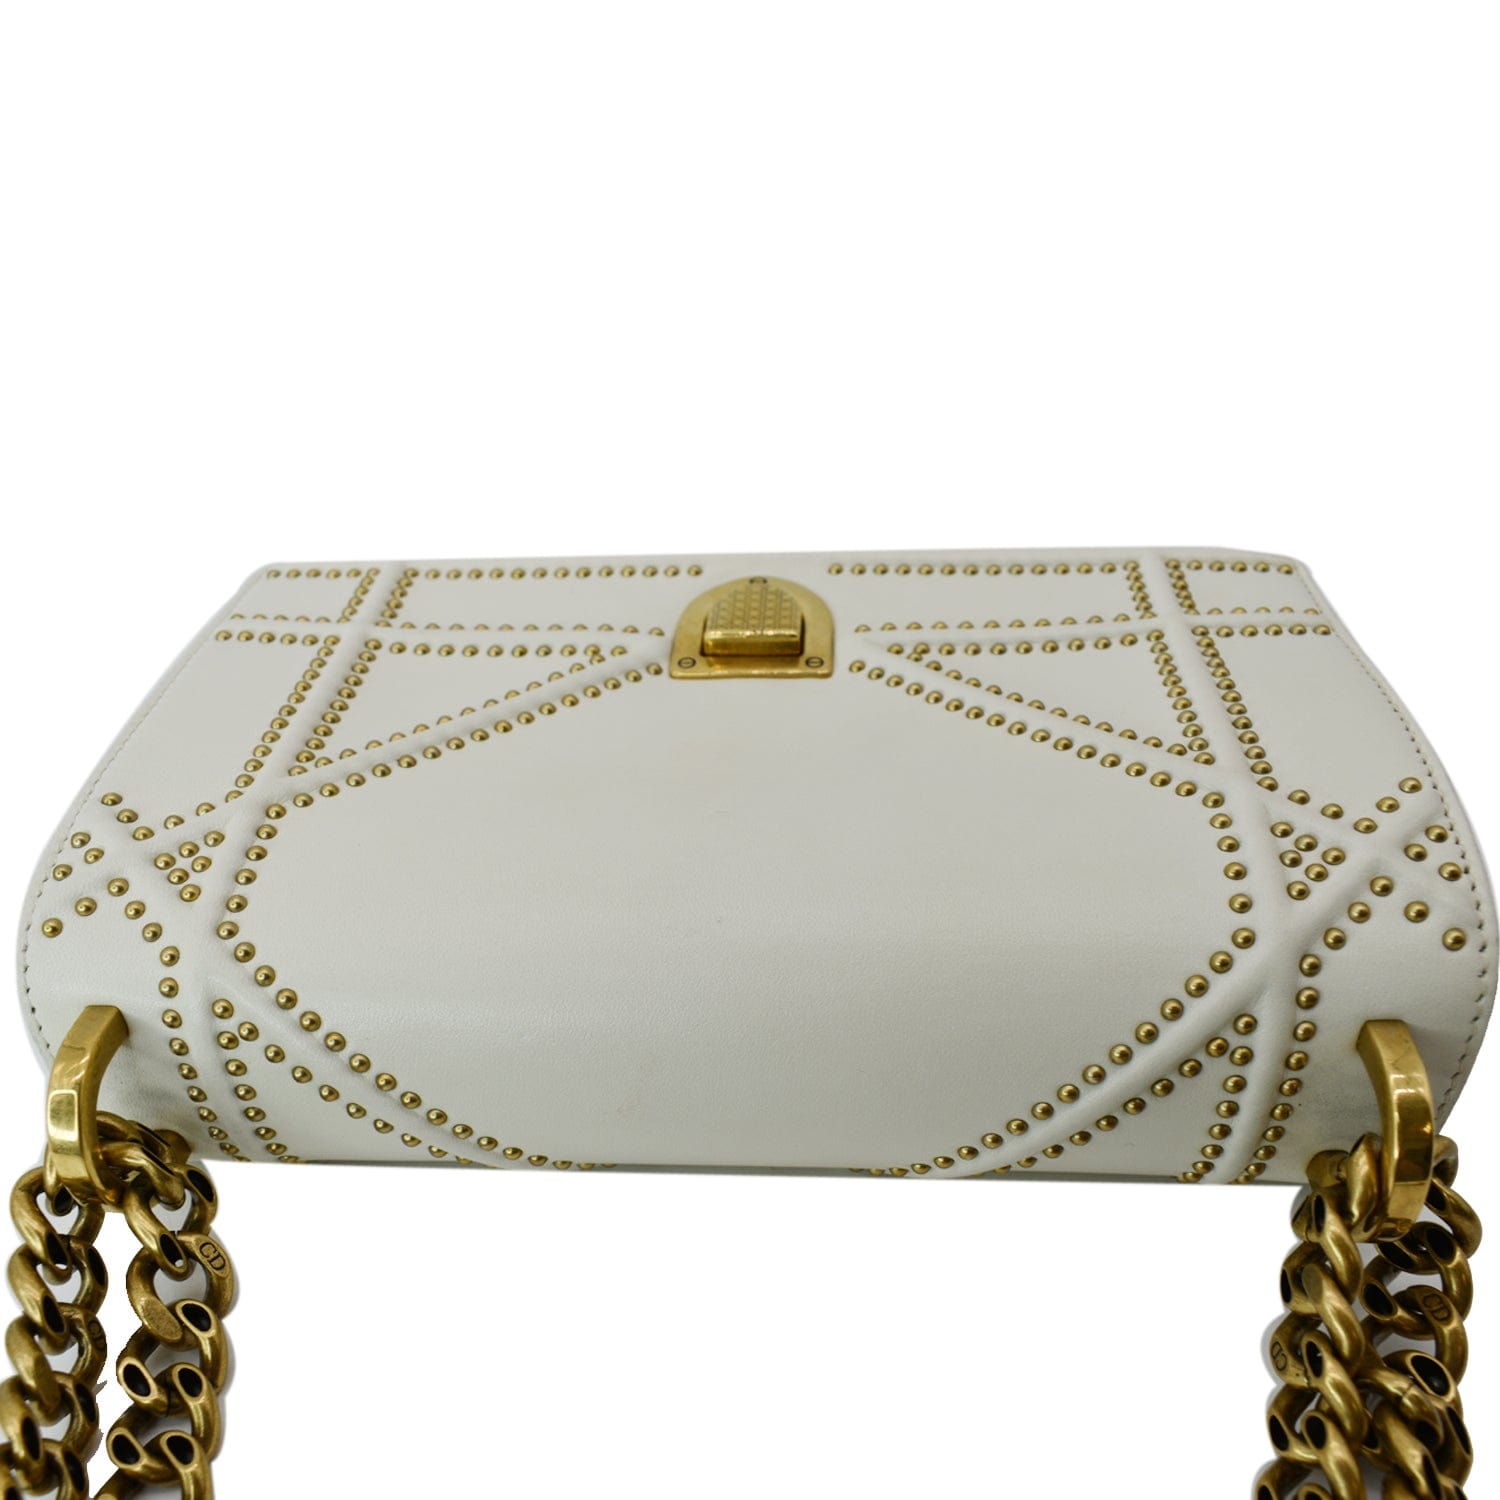 Sold at Auction: CHRISTIAN DIOR - DIORAMA - MEDIUM CRACKLED LEATHER  CROSSBODY BAG